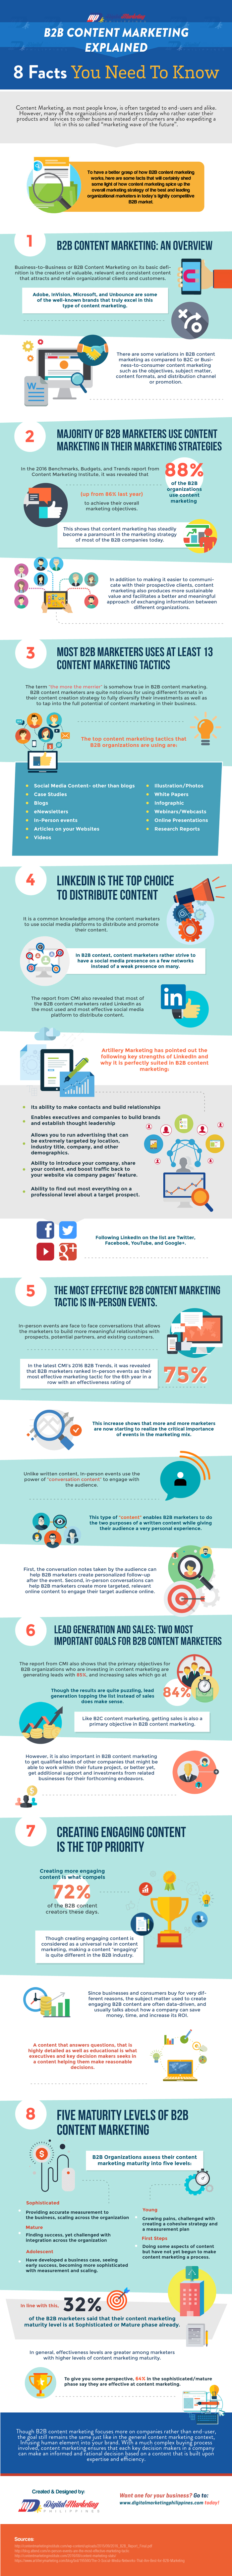 8 Facts You Need to Know About B2B Content Marketing Infographic